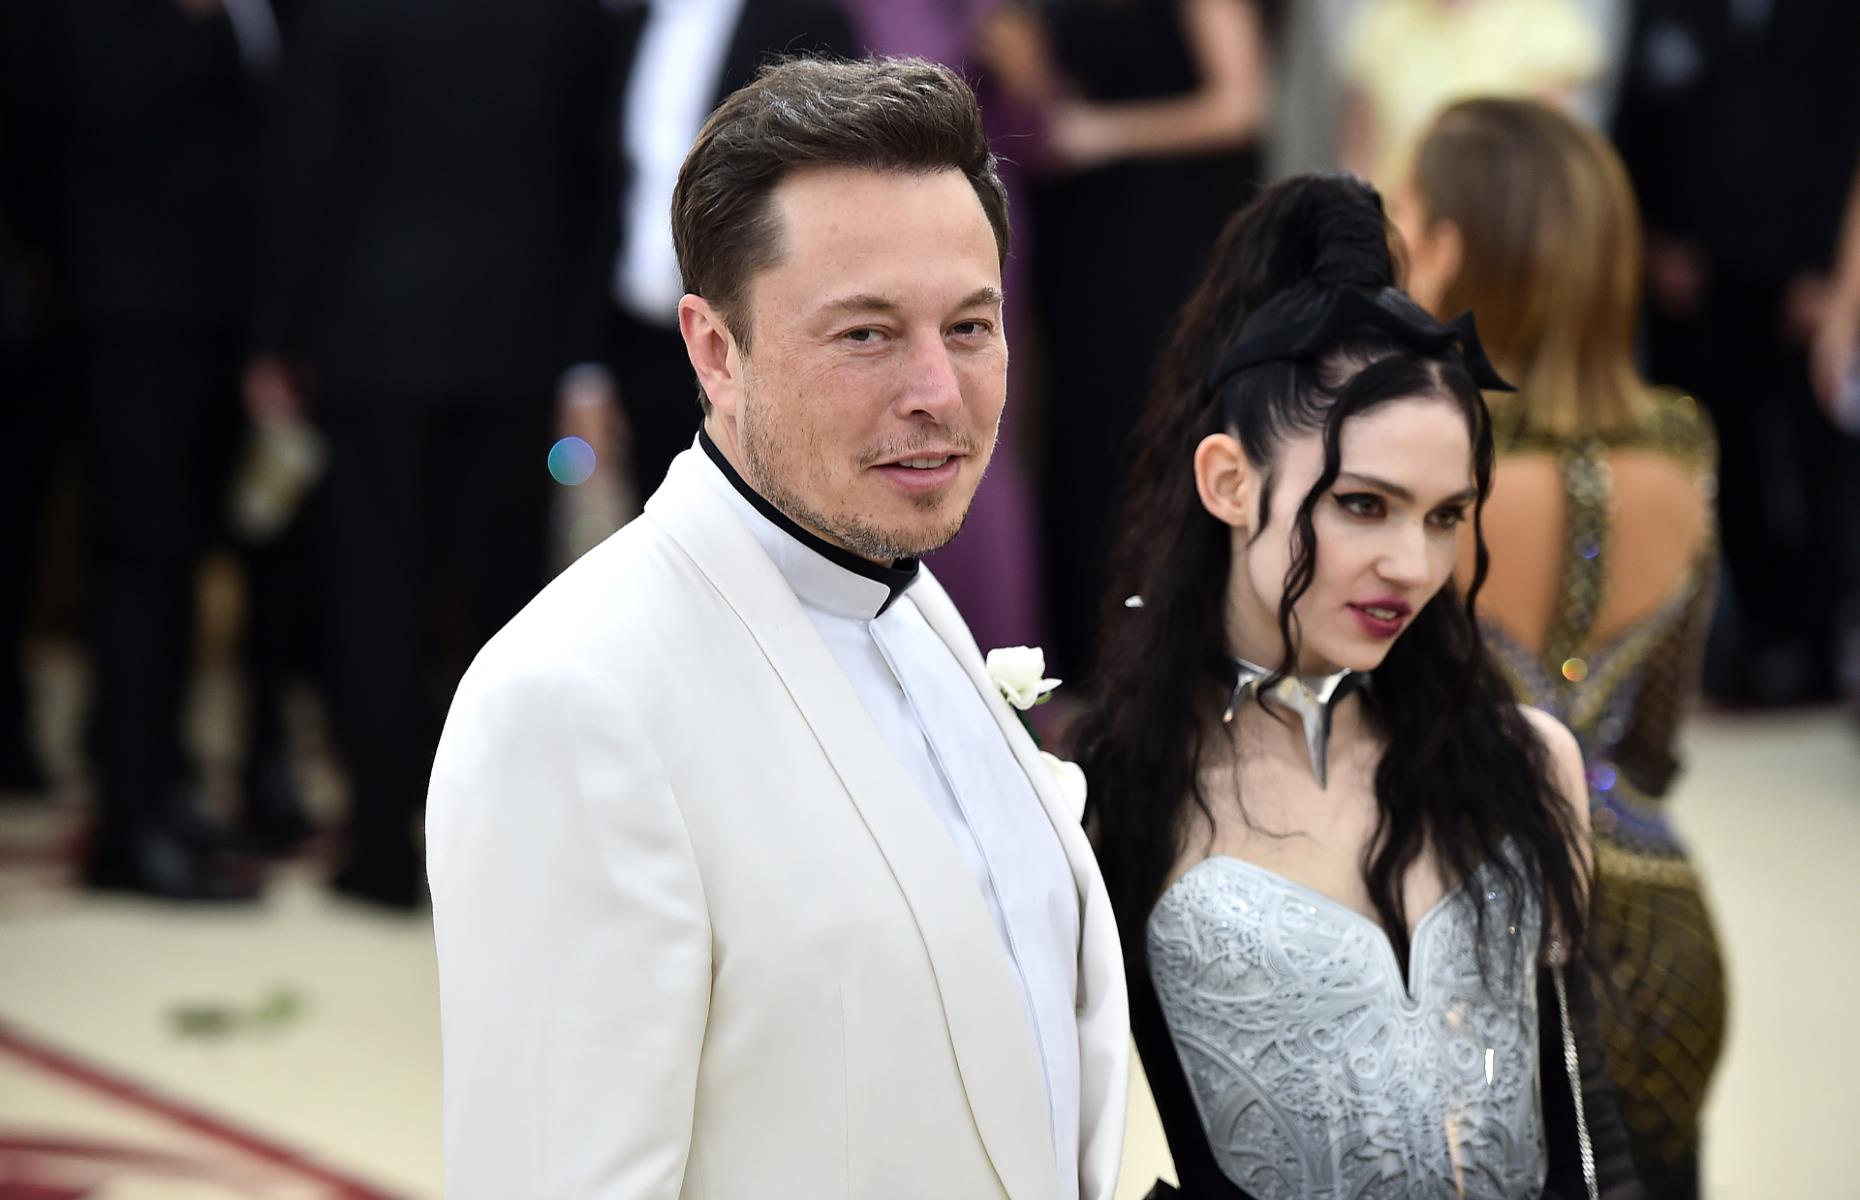 <p>Since around May 2018 Musk has been dating 32-year old Canadian singer Grimes. The pair announced the birth of their son X Æ A-12 on 4 May 2020, with Grimes taking to Twitter to explain the baby's unusual name: "X" stands for "the unknown variable"; "Æ" is the elven spelling of AI (meaning love and also artificial intelligence); while A-12 is the from the Lockheed A-12 aircraft, the precursor to the Lockheed SR-71 Blackbird, an aircraft loved by the couple which had "no weapons, no defenses, just speed", while the "A" also refers to Archangel, Grimes' favourite song.</p>